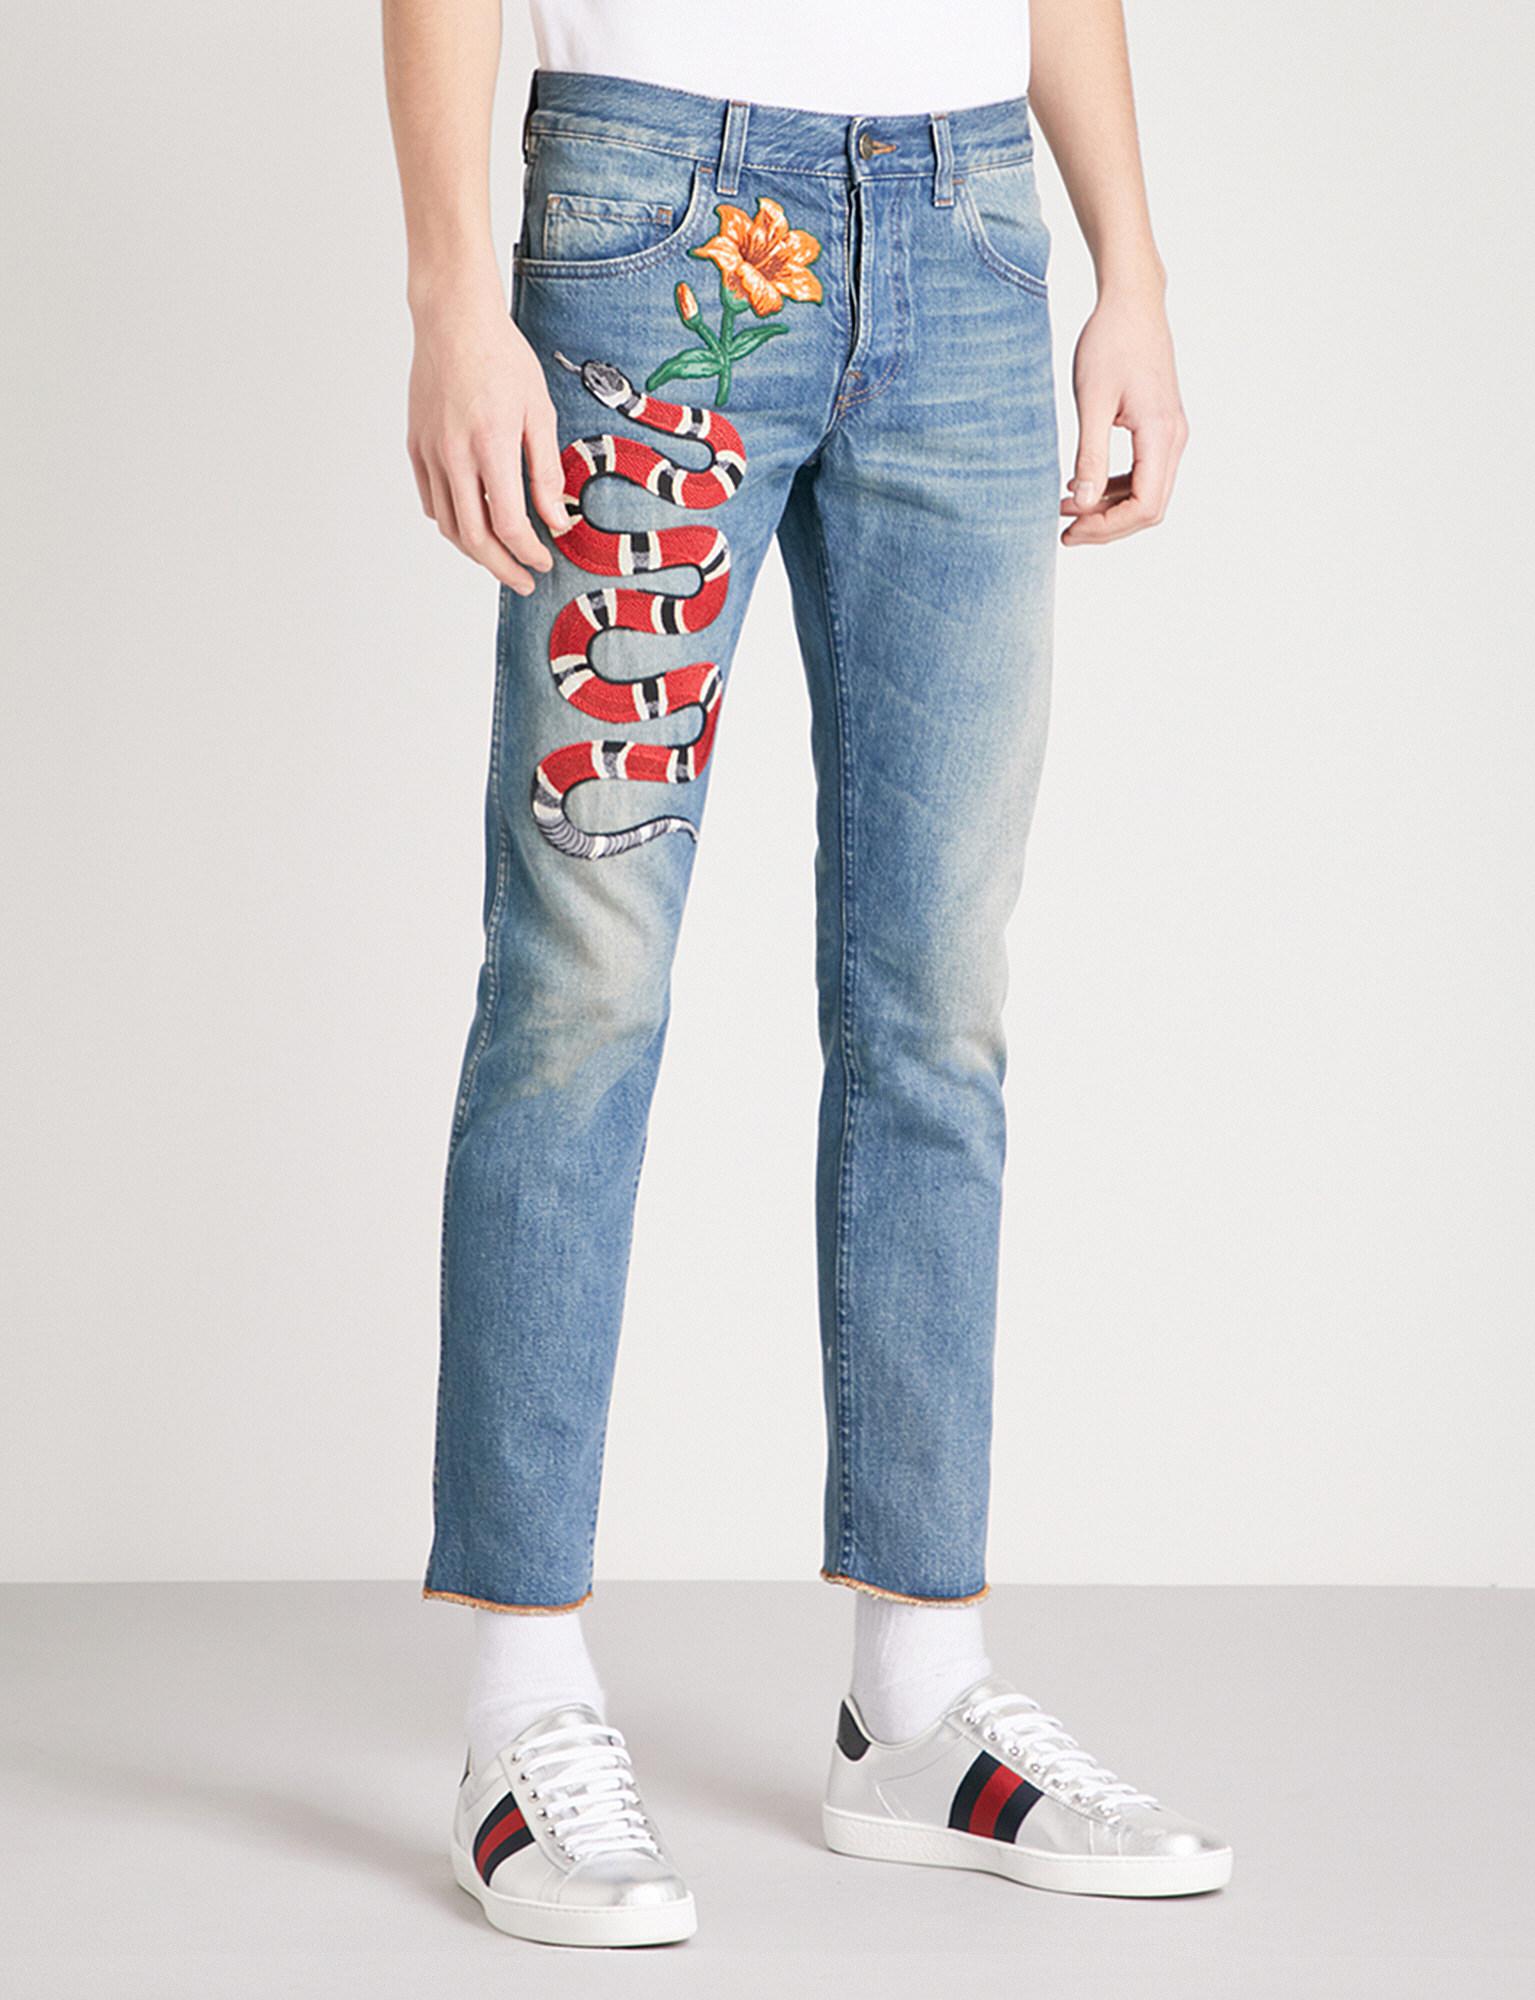 Gucci Embroidered Jeans Deals, 52% OFF | lagence.tv